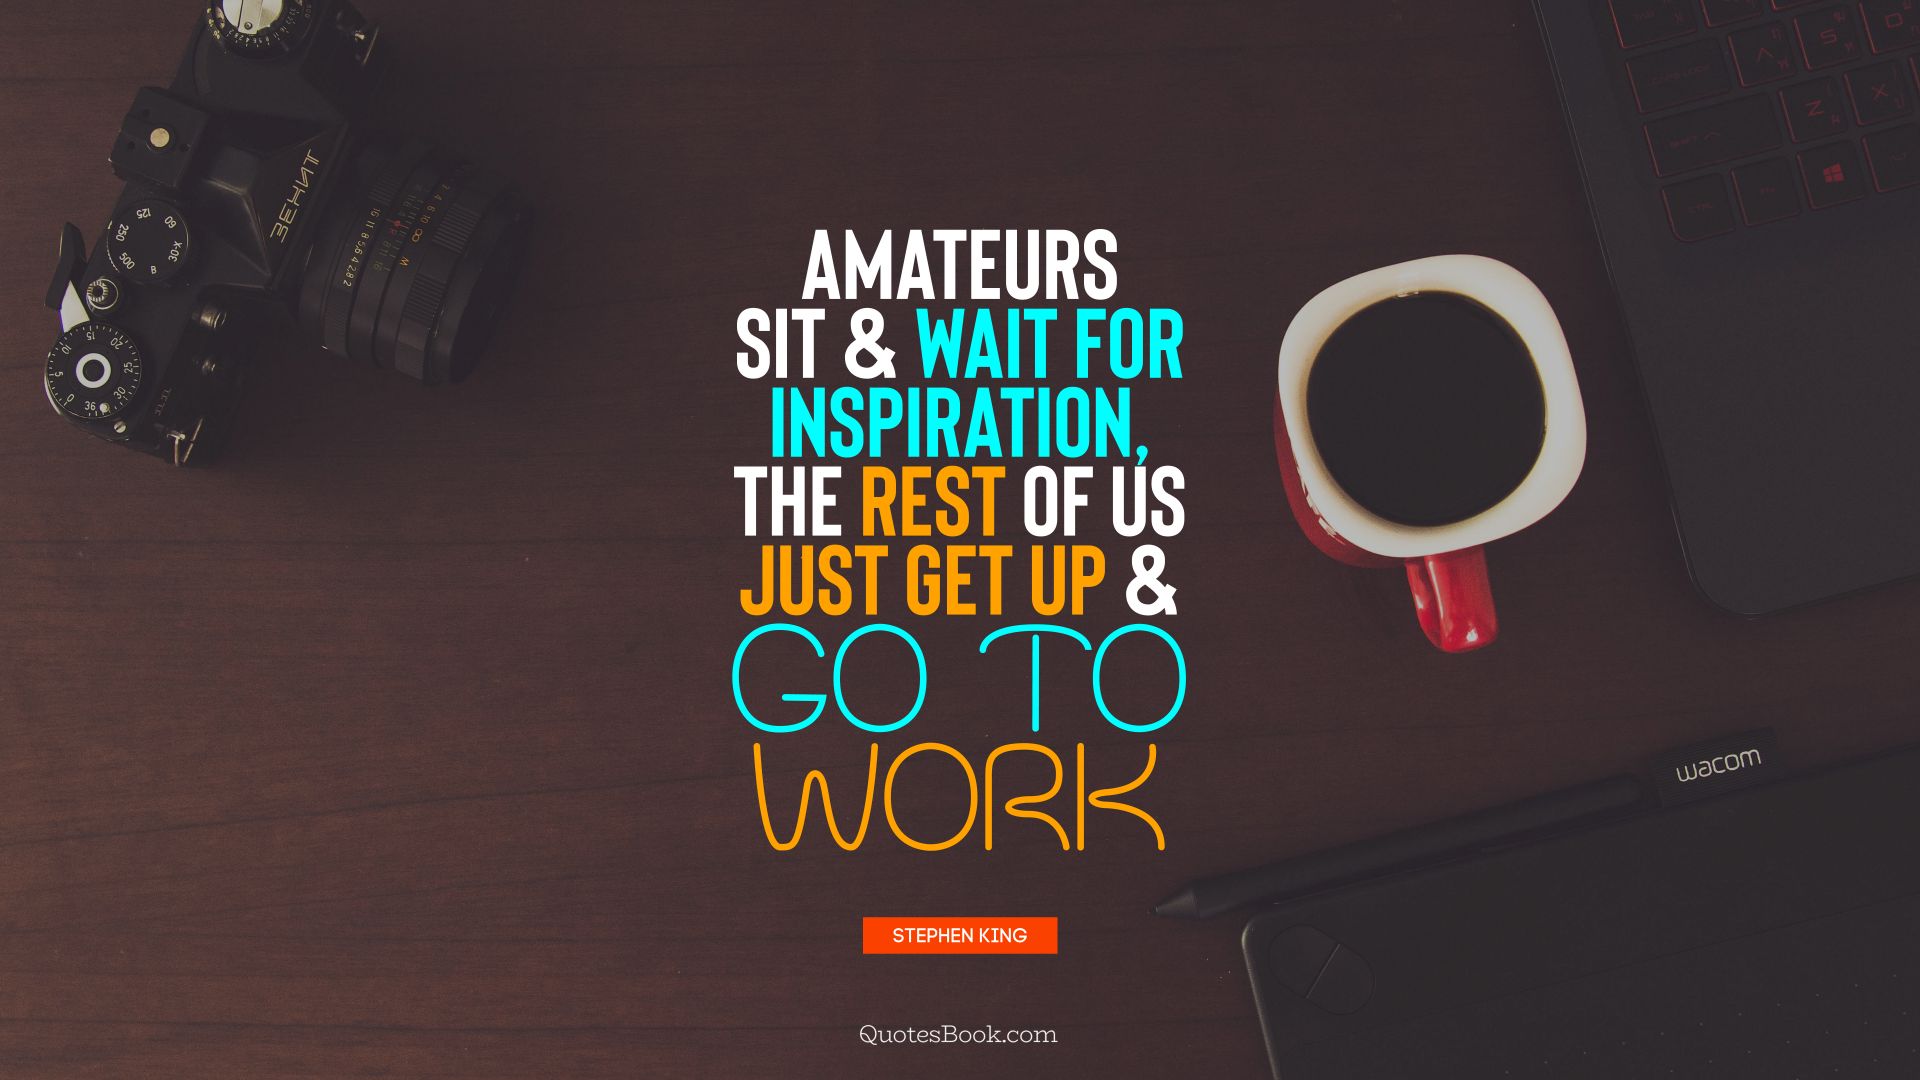 Amateurs sit and wait for inspiration, the rest of us just get up and go to work. - Quote by Stephen King